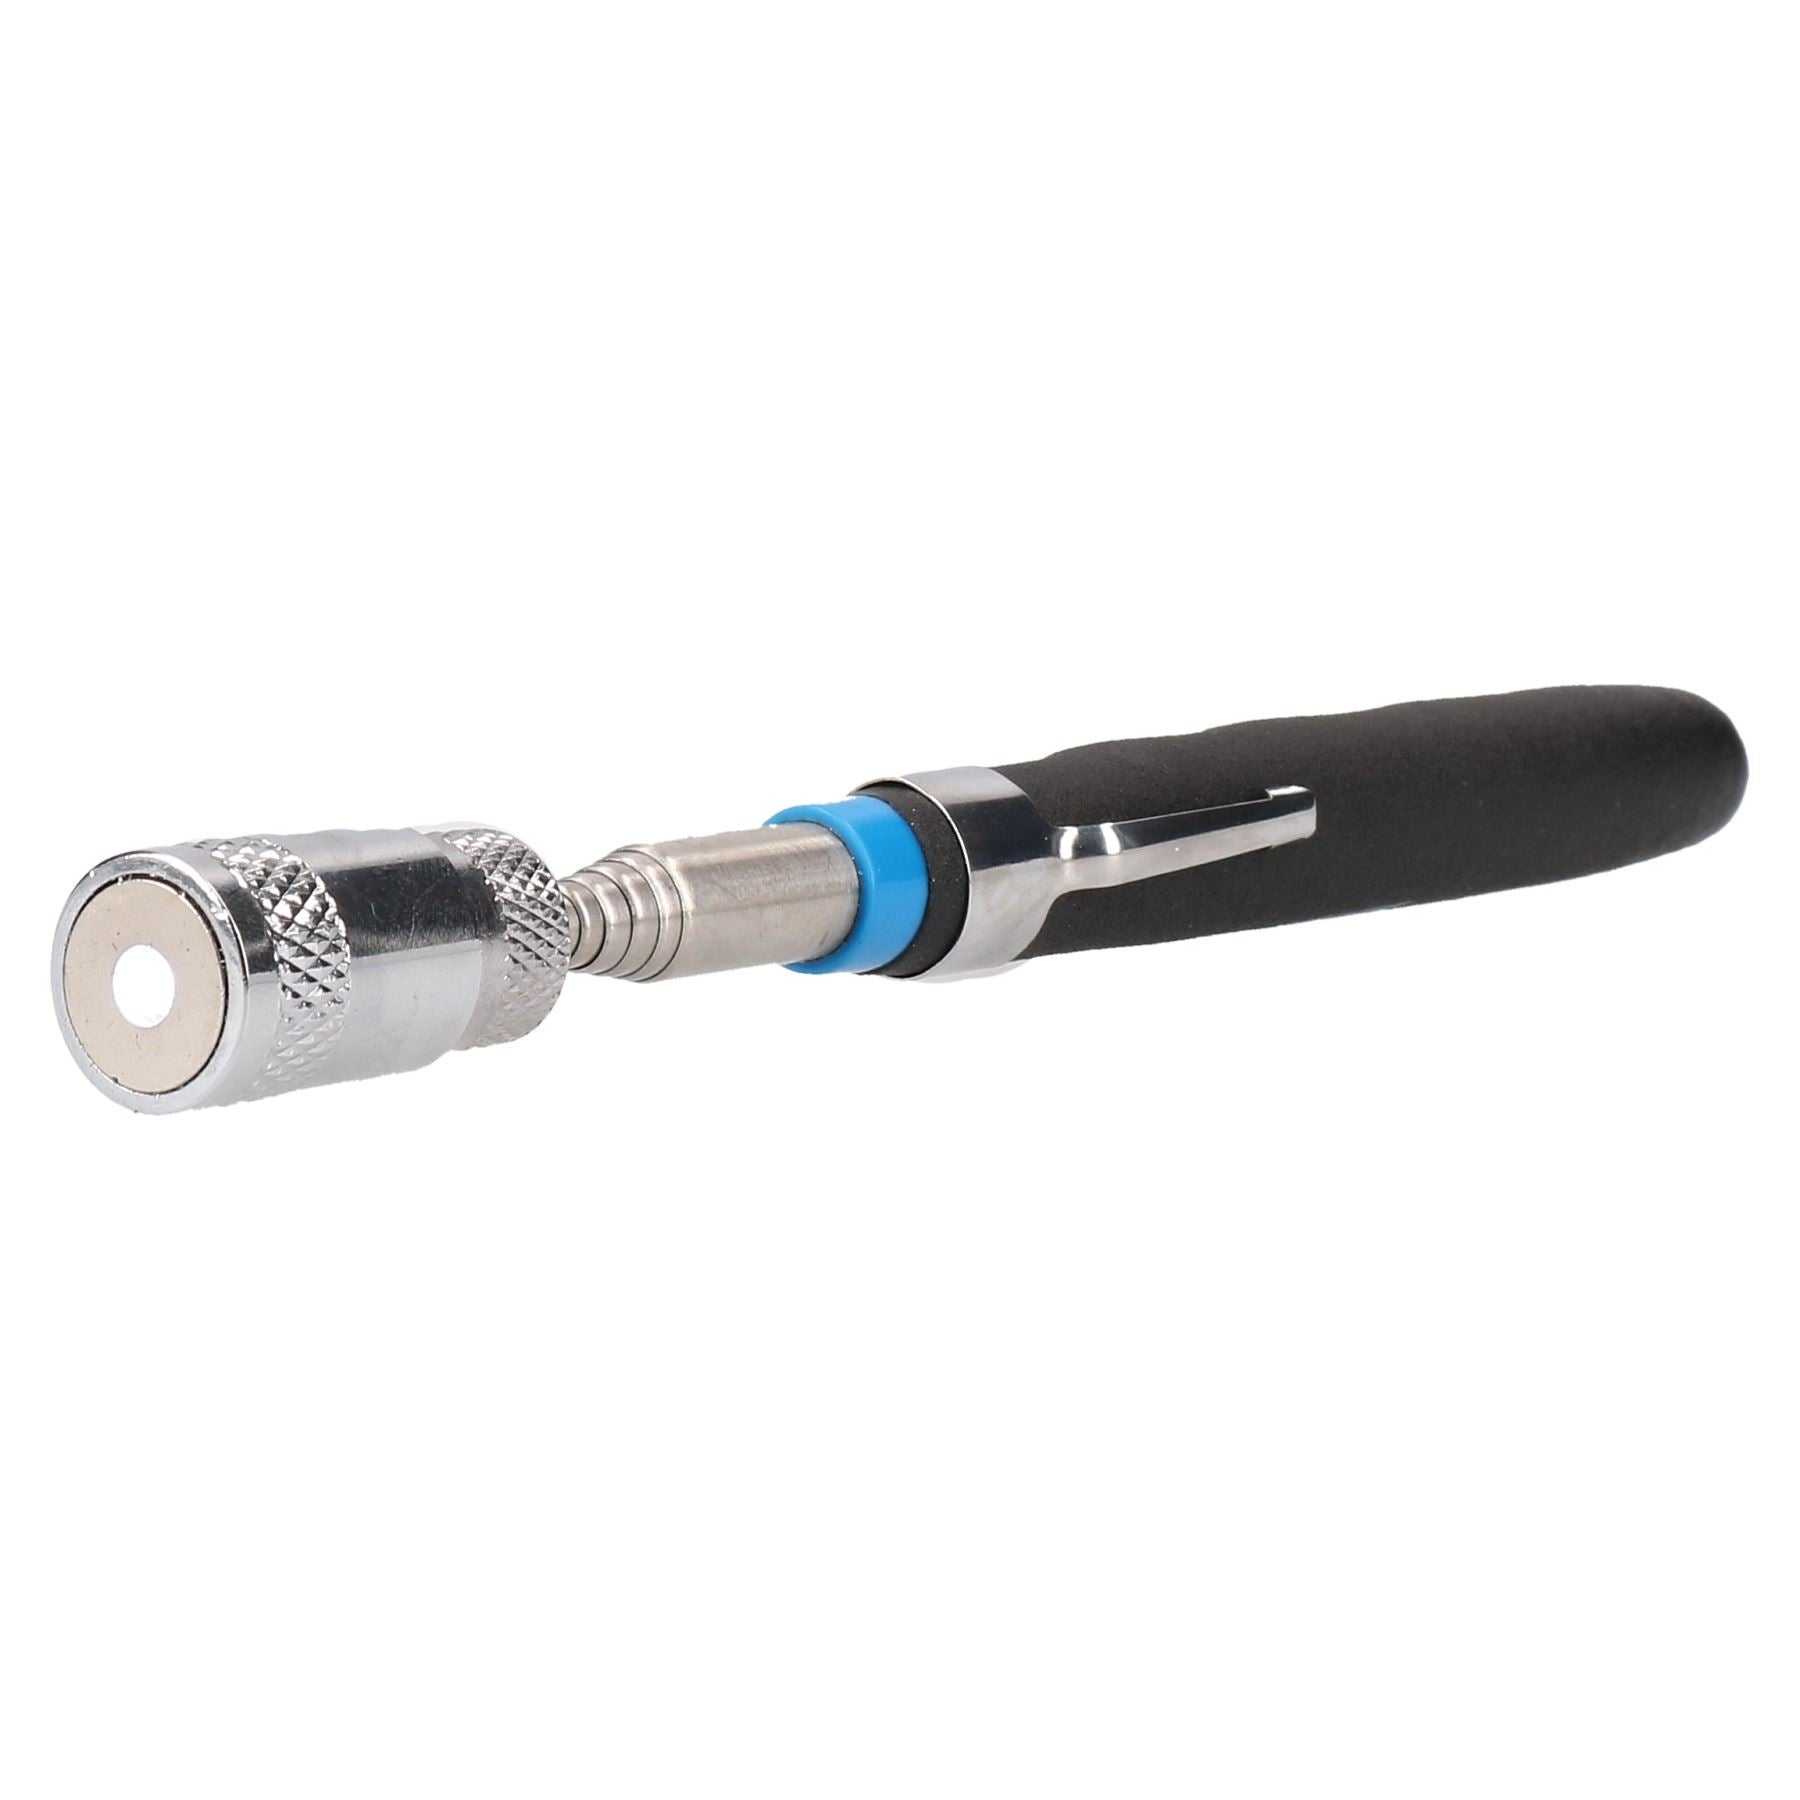 3.6kg Magnetic Telescopic Pick up Tool Extending Reach Pen with LED Light